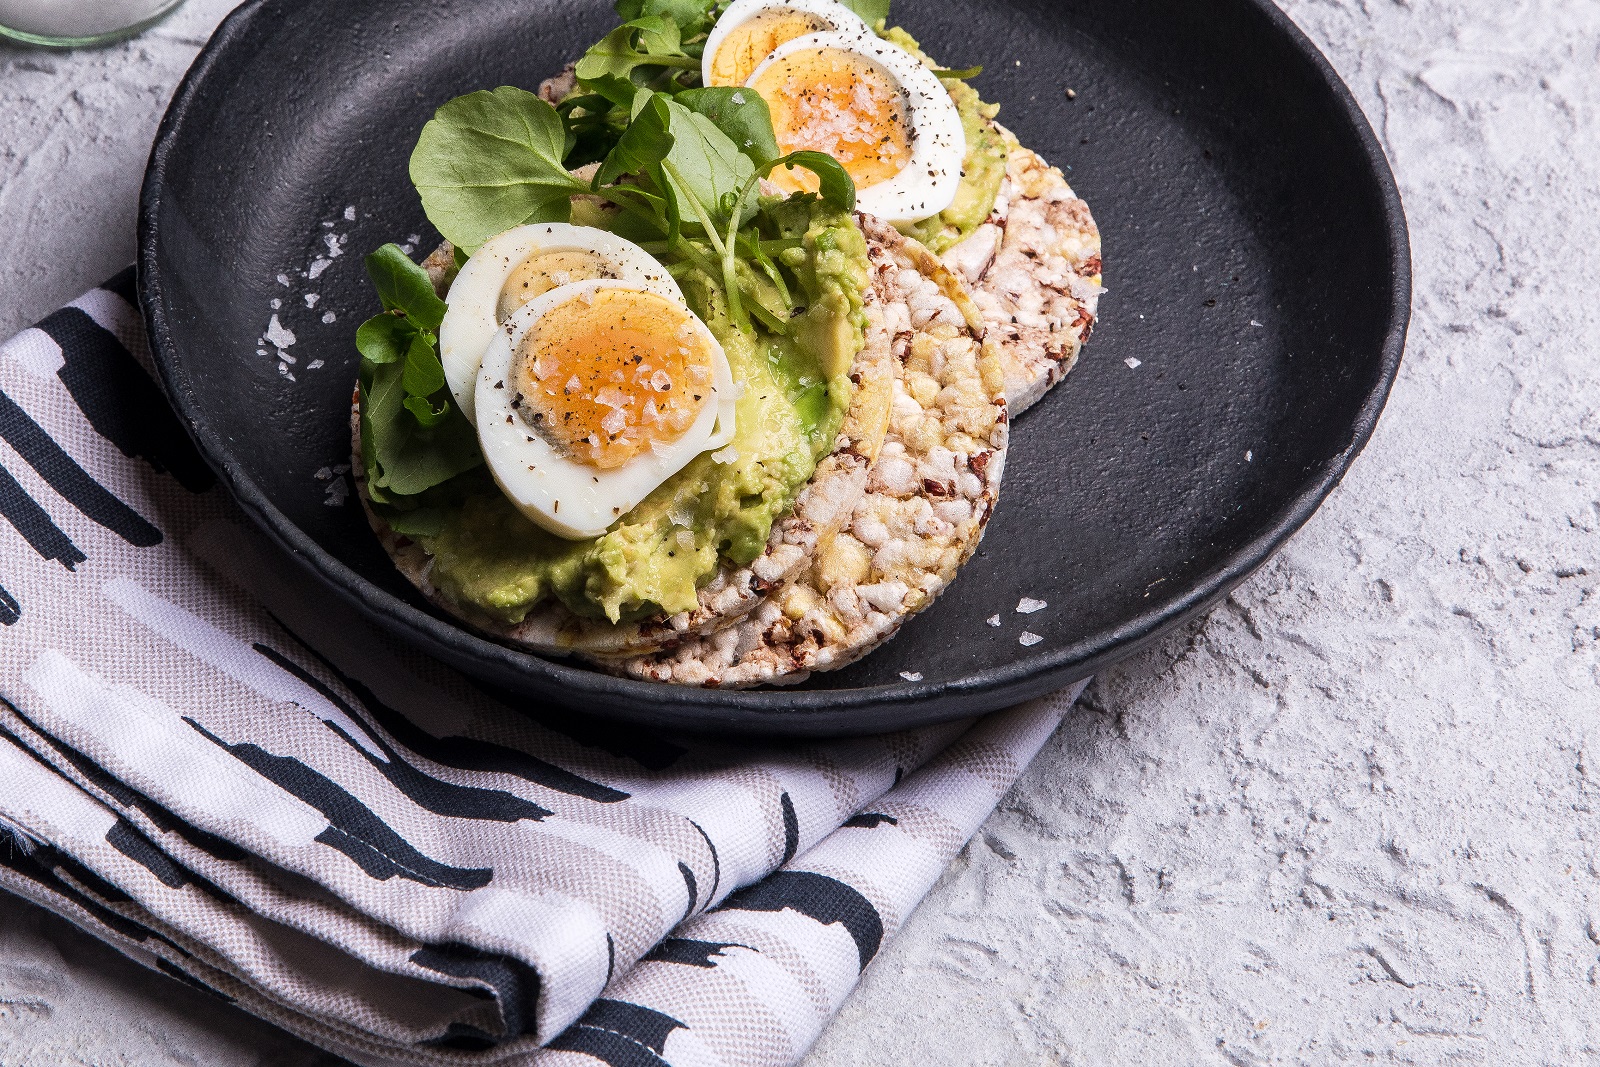 Avocado, Boiled Egg & Watercress for breakfast with CORN THINS slices